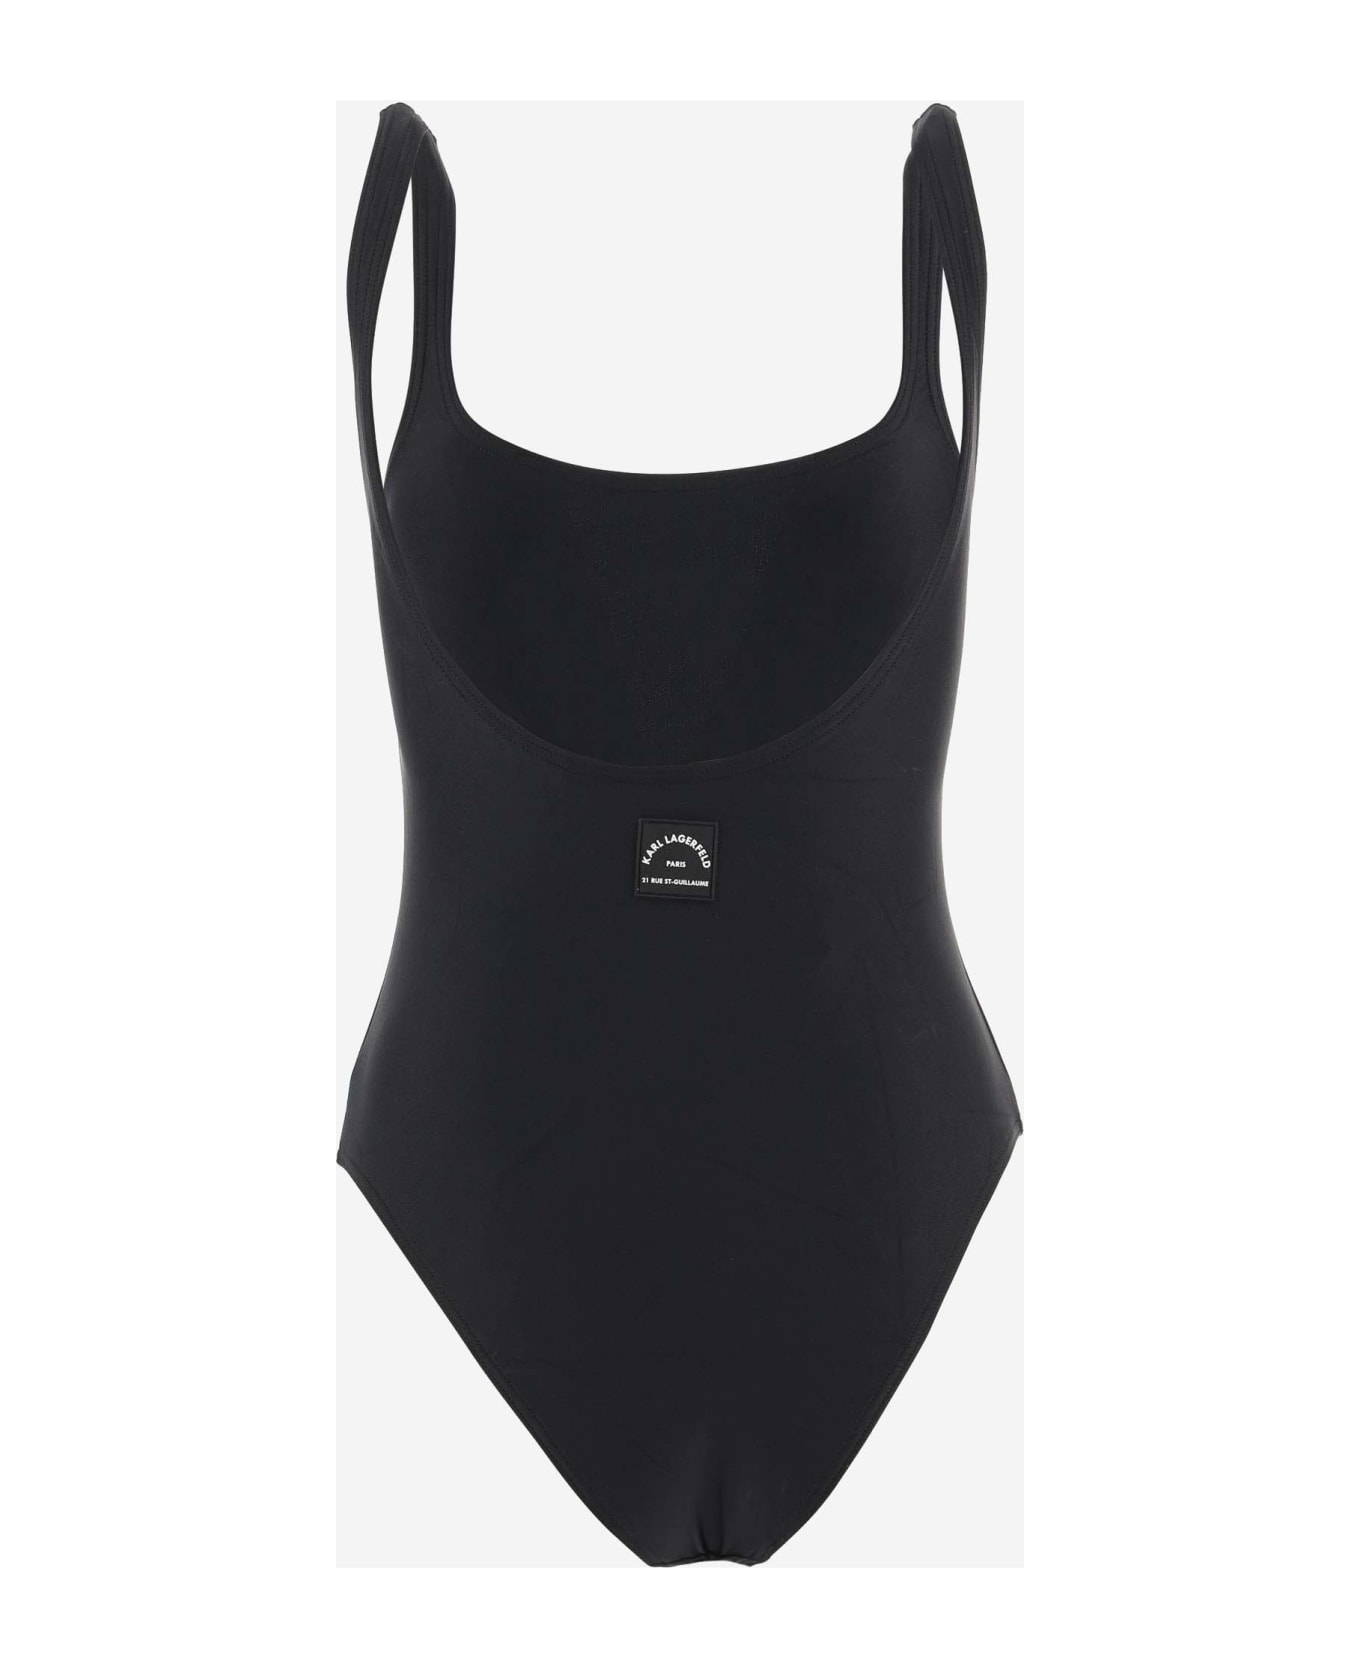 Karl Lagerfeld One-piece Swimsuit Rue St-guillaume - Black